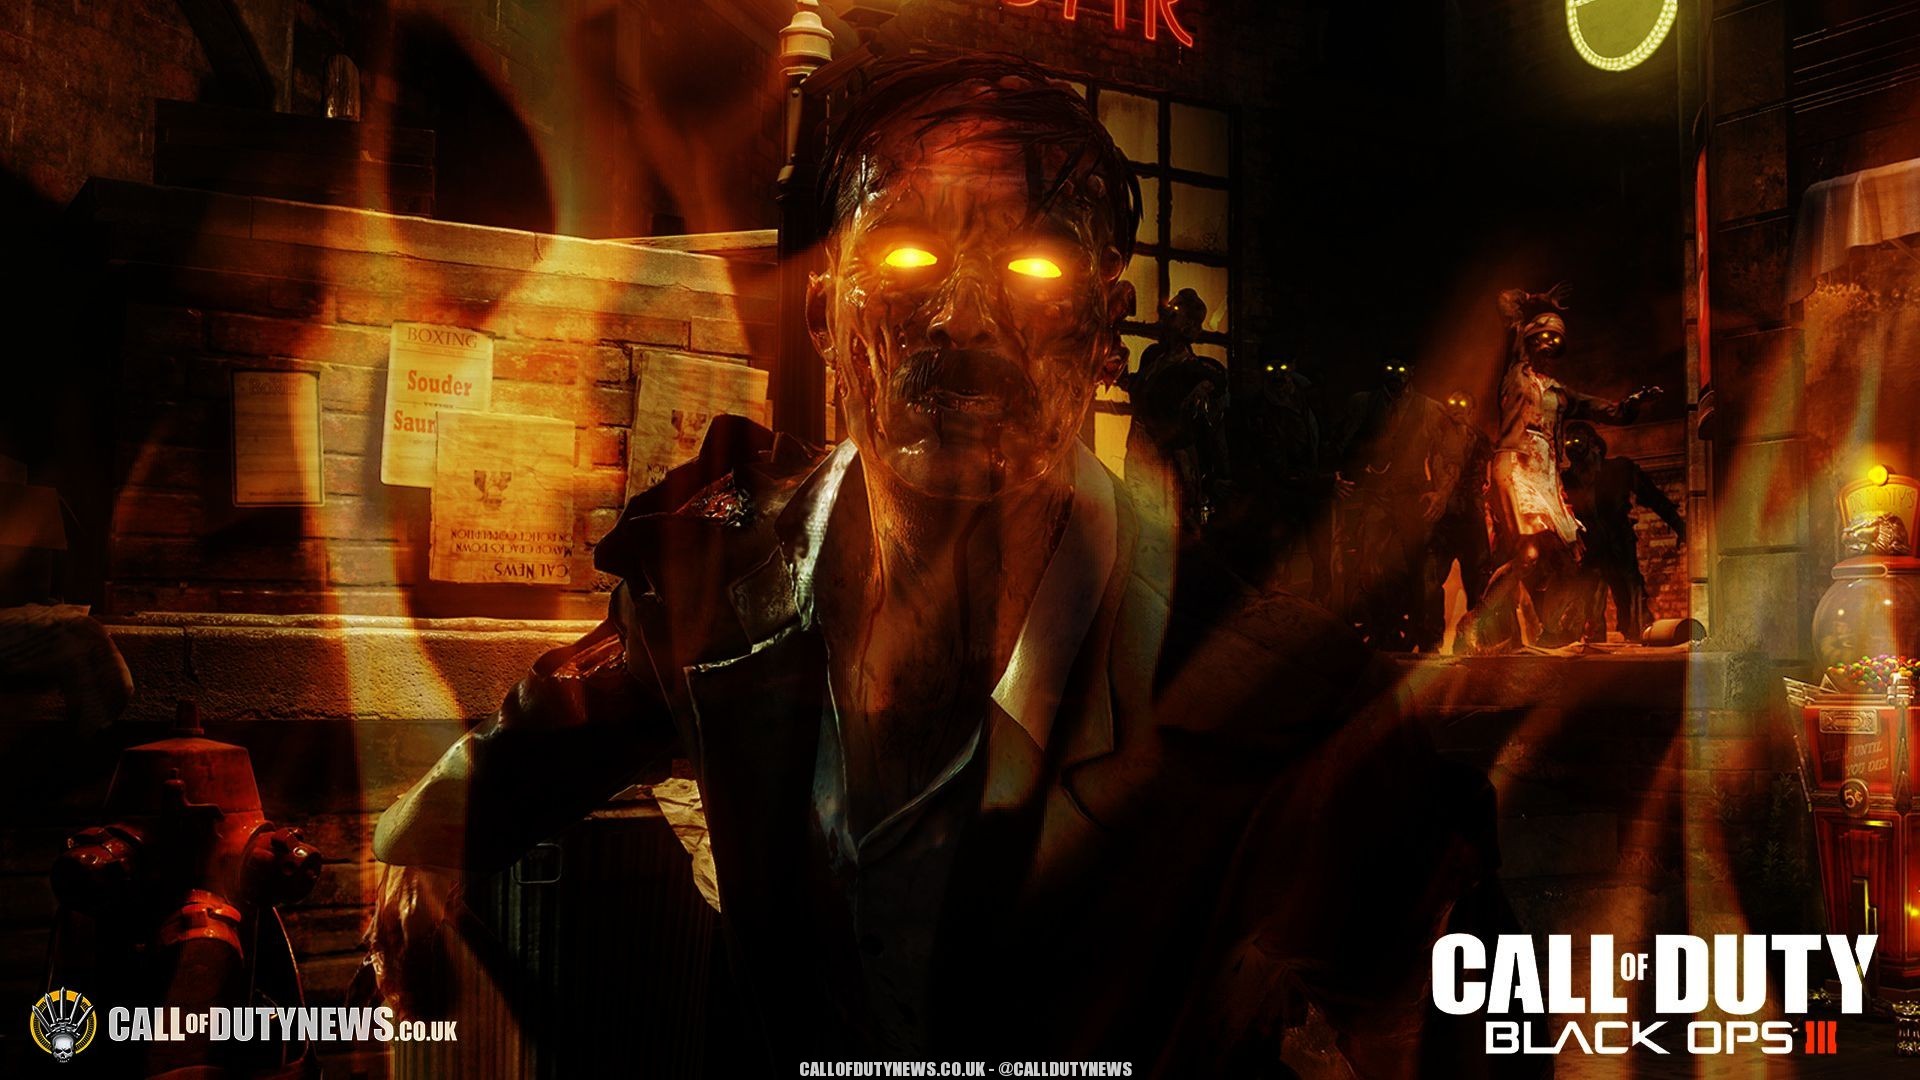 Black ops 3 bo3 wallpaper 14 zombies Call of